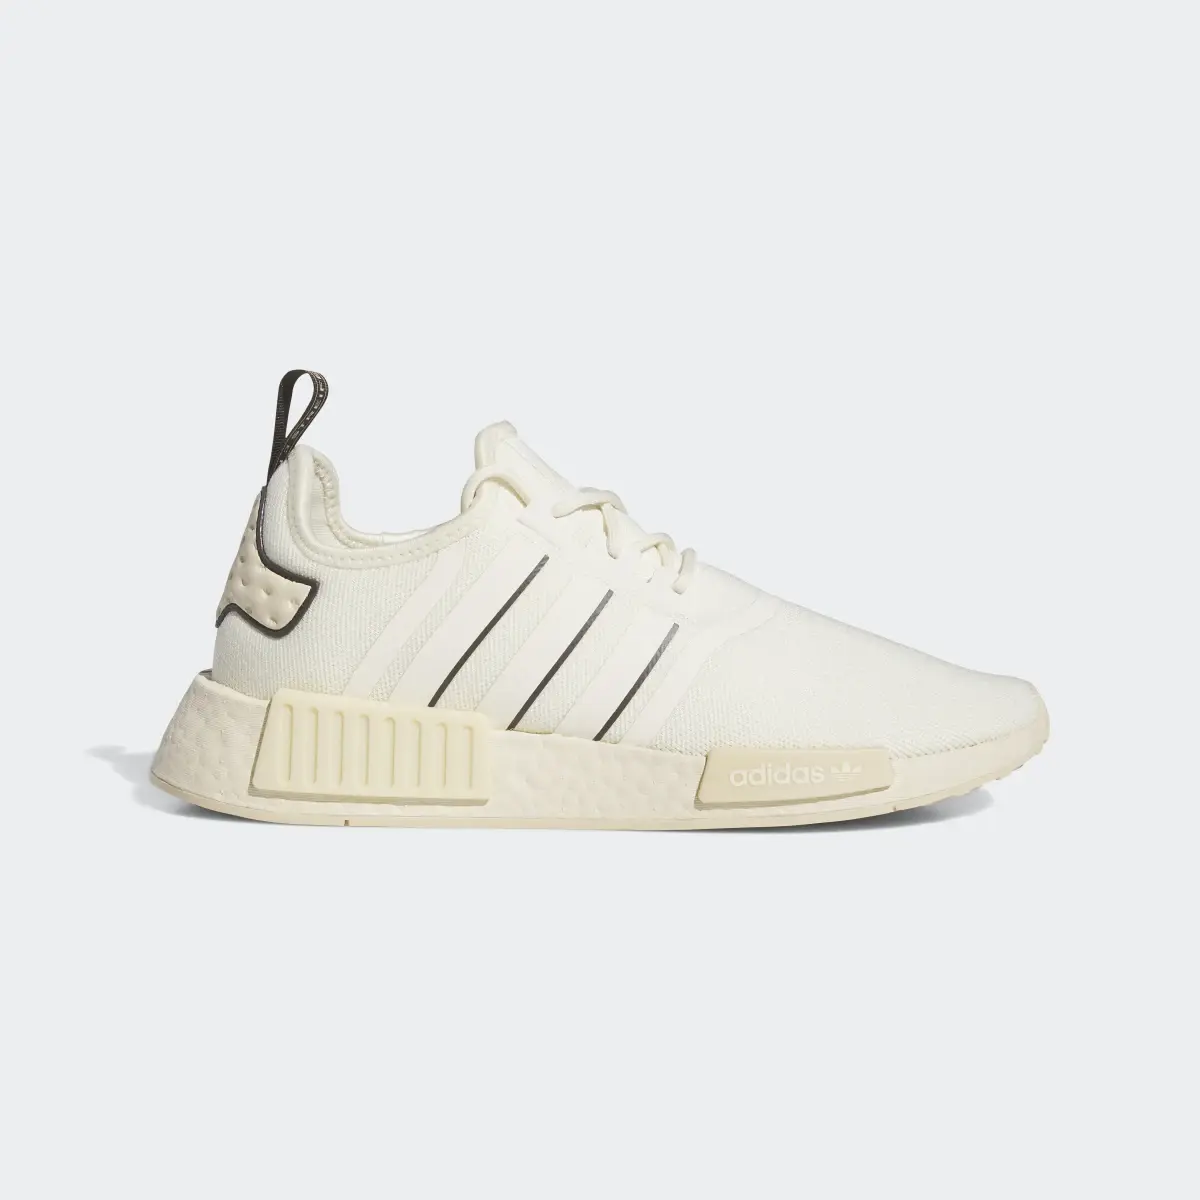 Adidas NMD_R1 Low Trainers. 2